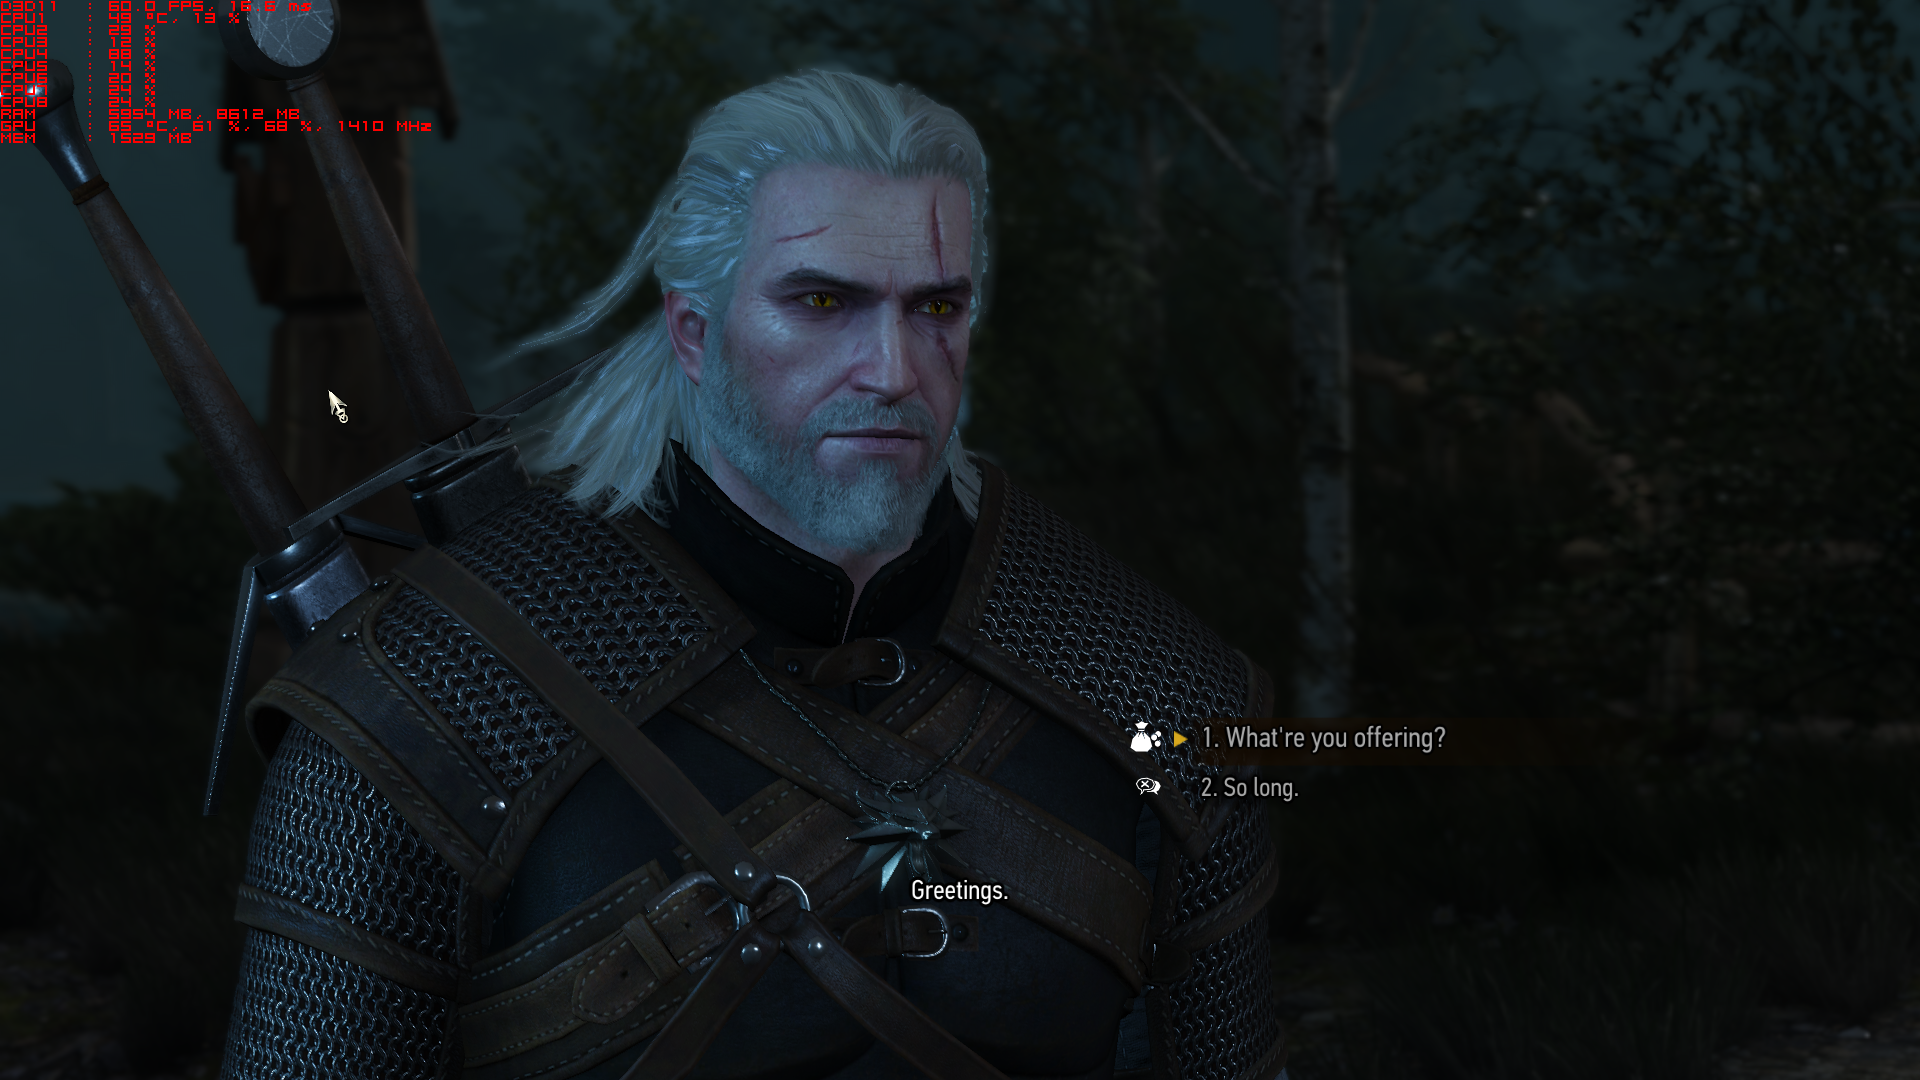 witcher3_2015_05_22_1osubv.png